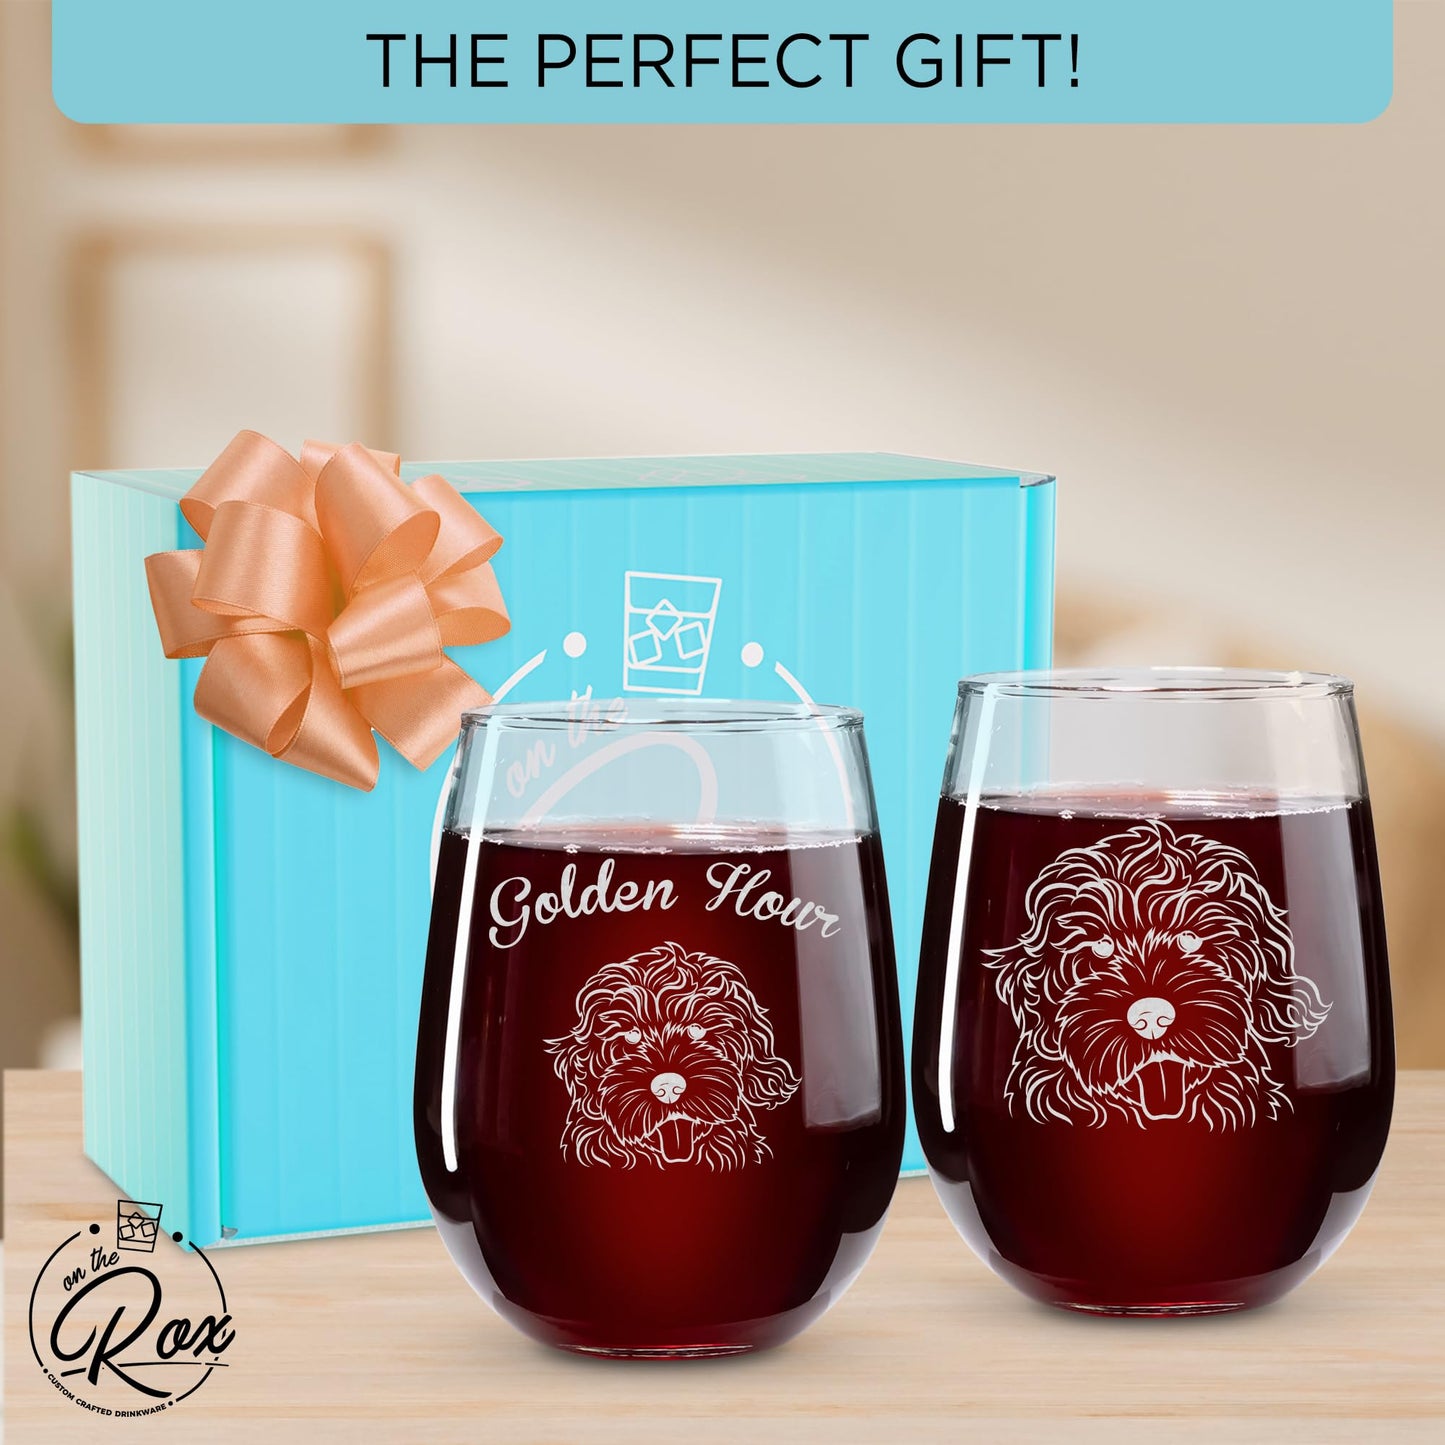 On The Rox Drinks Dog Gifts for Women - 17 Oz Golden Hour Stemless Wine Glass Set of 2 - Golden Doodle Gifts, Accessories for Golden Doodle Lovers - Funny Golden Retriever-Poodle Wine Cups for Mom